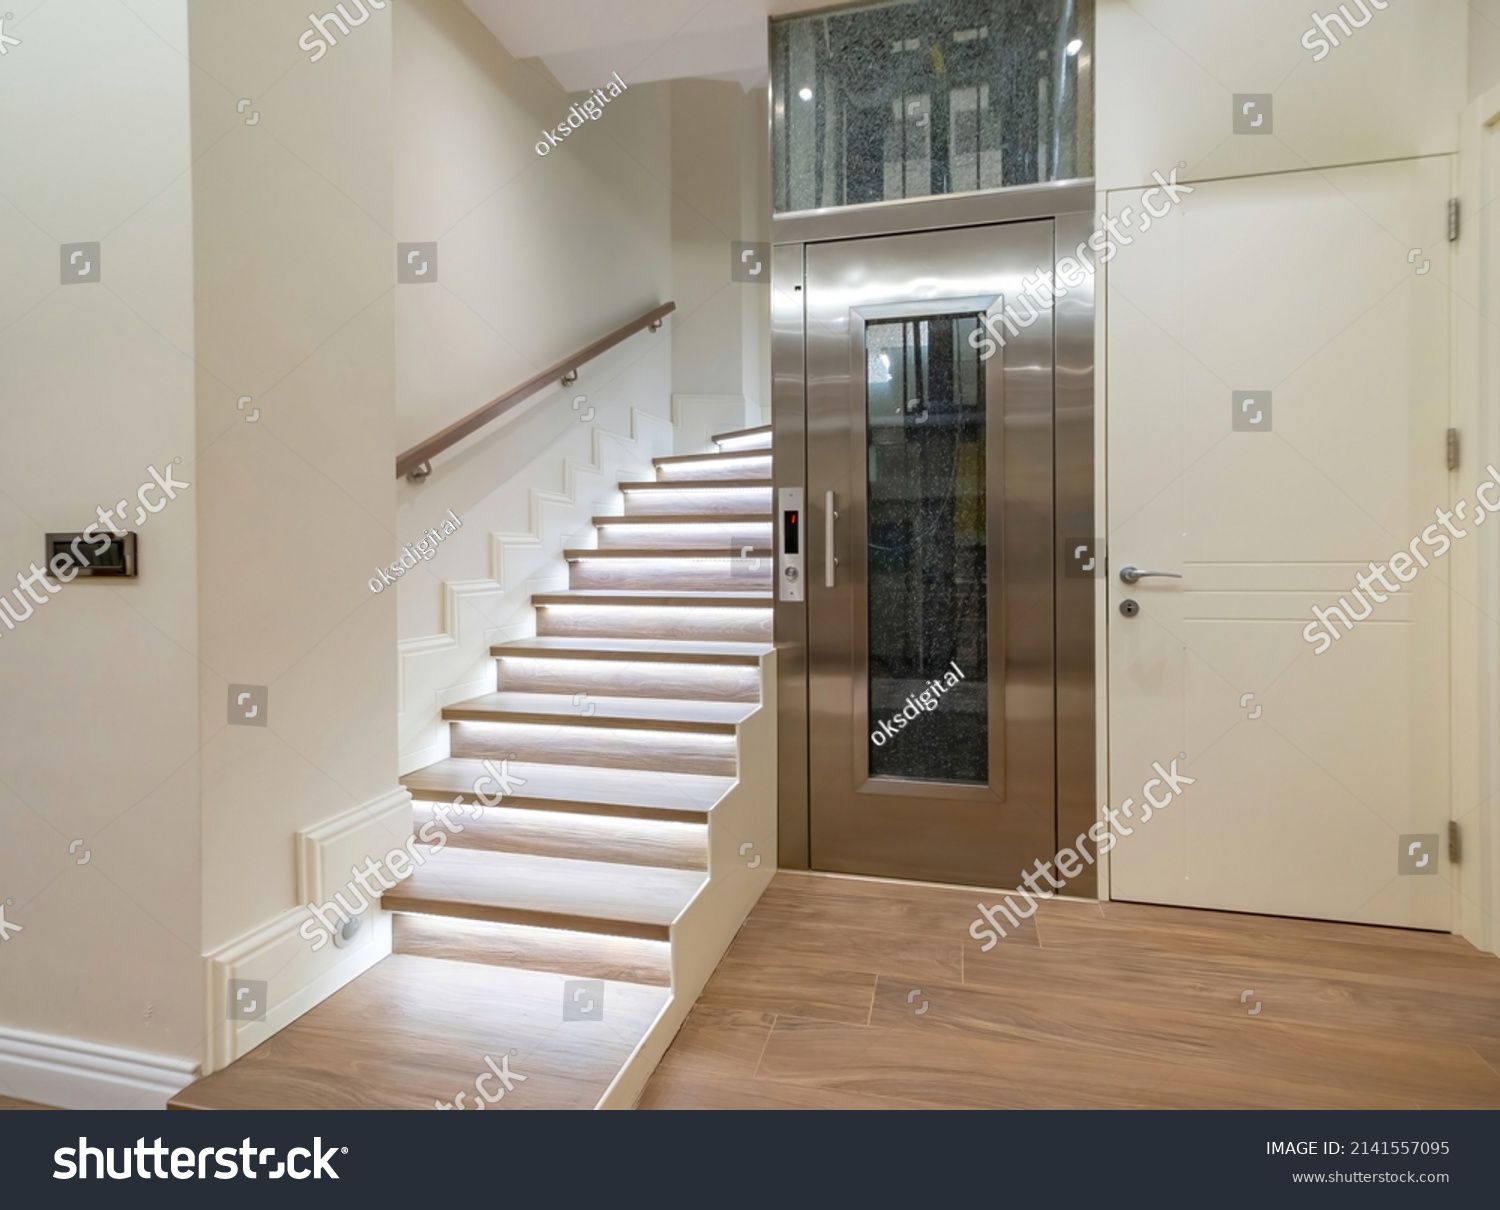 Stairs and elevator of luxury house #2141557095